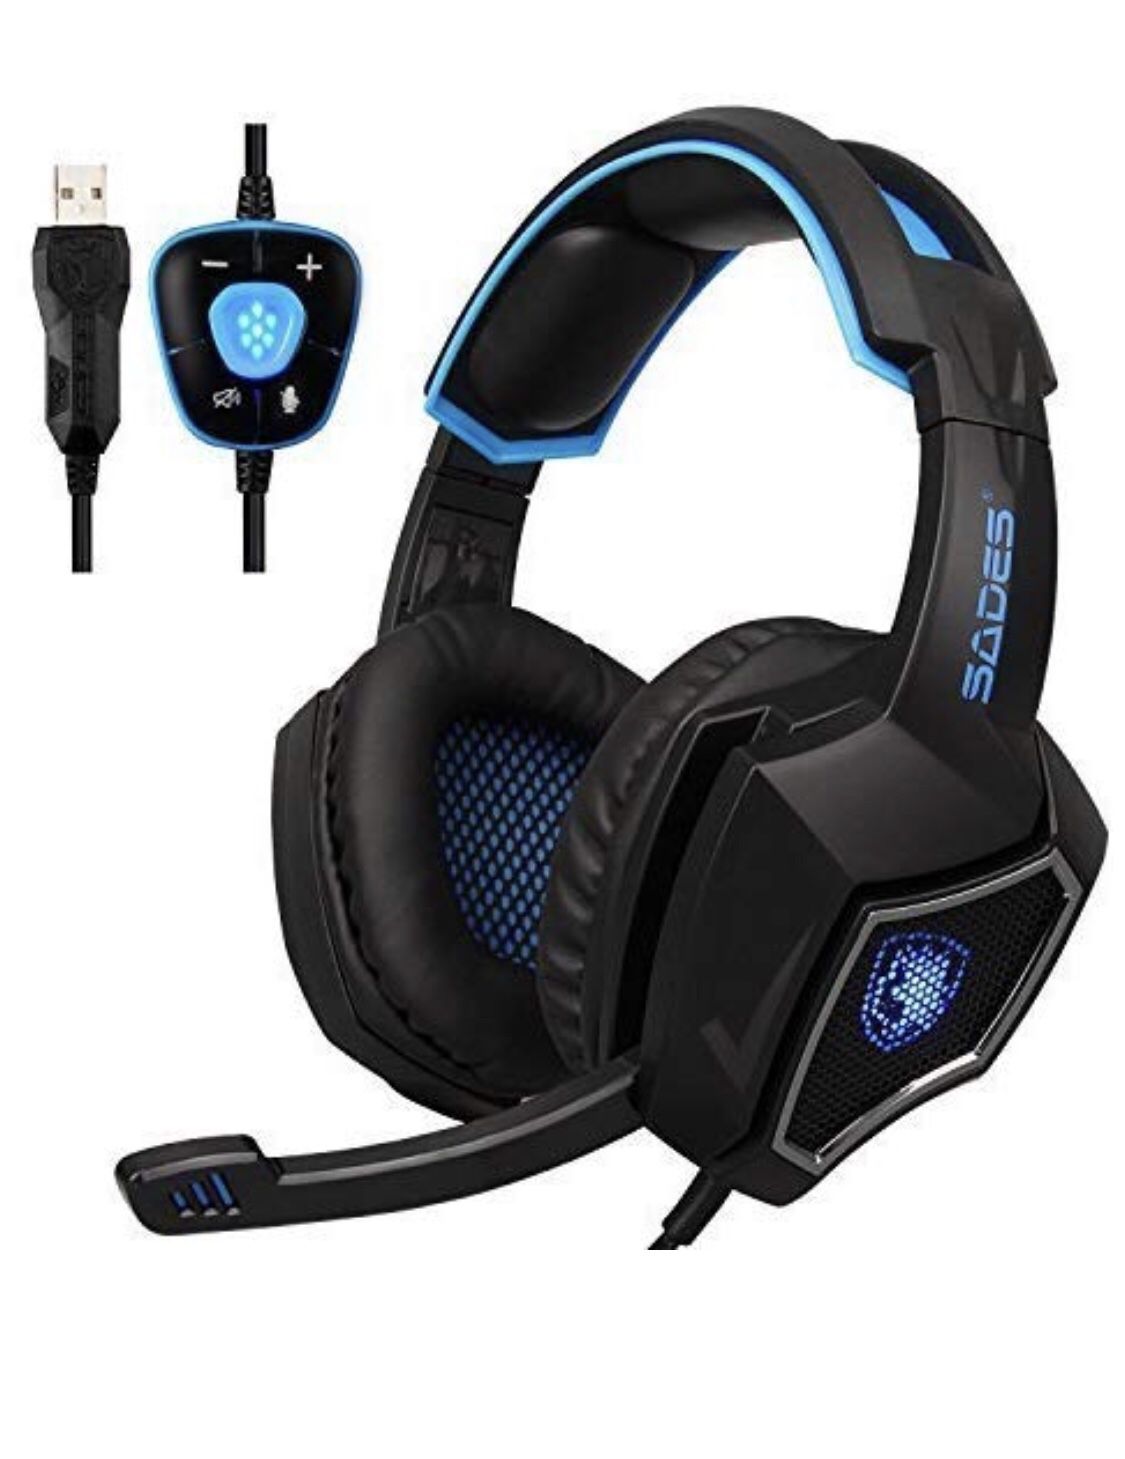 New Updated SADES Spirit Wolf 7.1 Surround Stereo Sound USB ComputerGaming Headset with Microphone,Over-the-Ear Noise Isolating,Breathing LED Light F